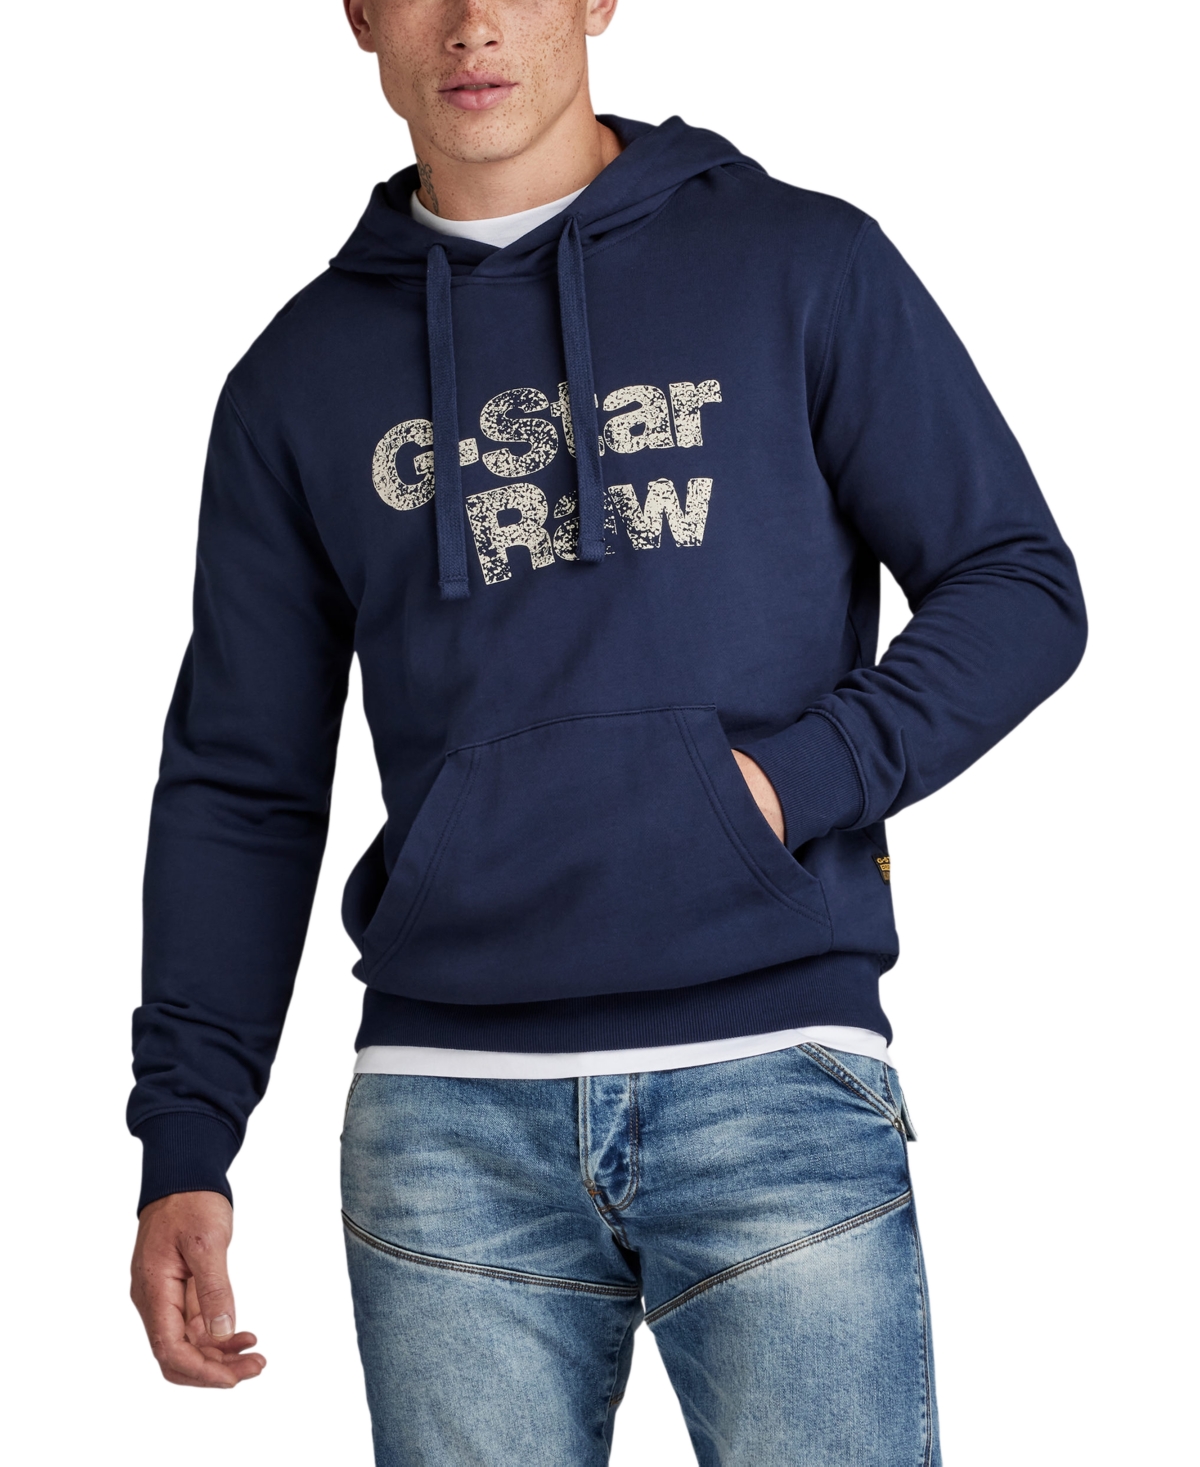 G-star Raw Men's Painted Graphic Hooded Sweatshirt In Blue